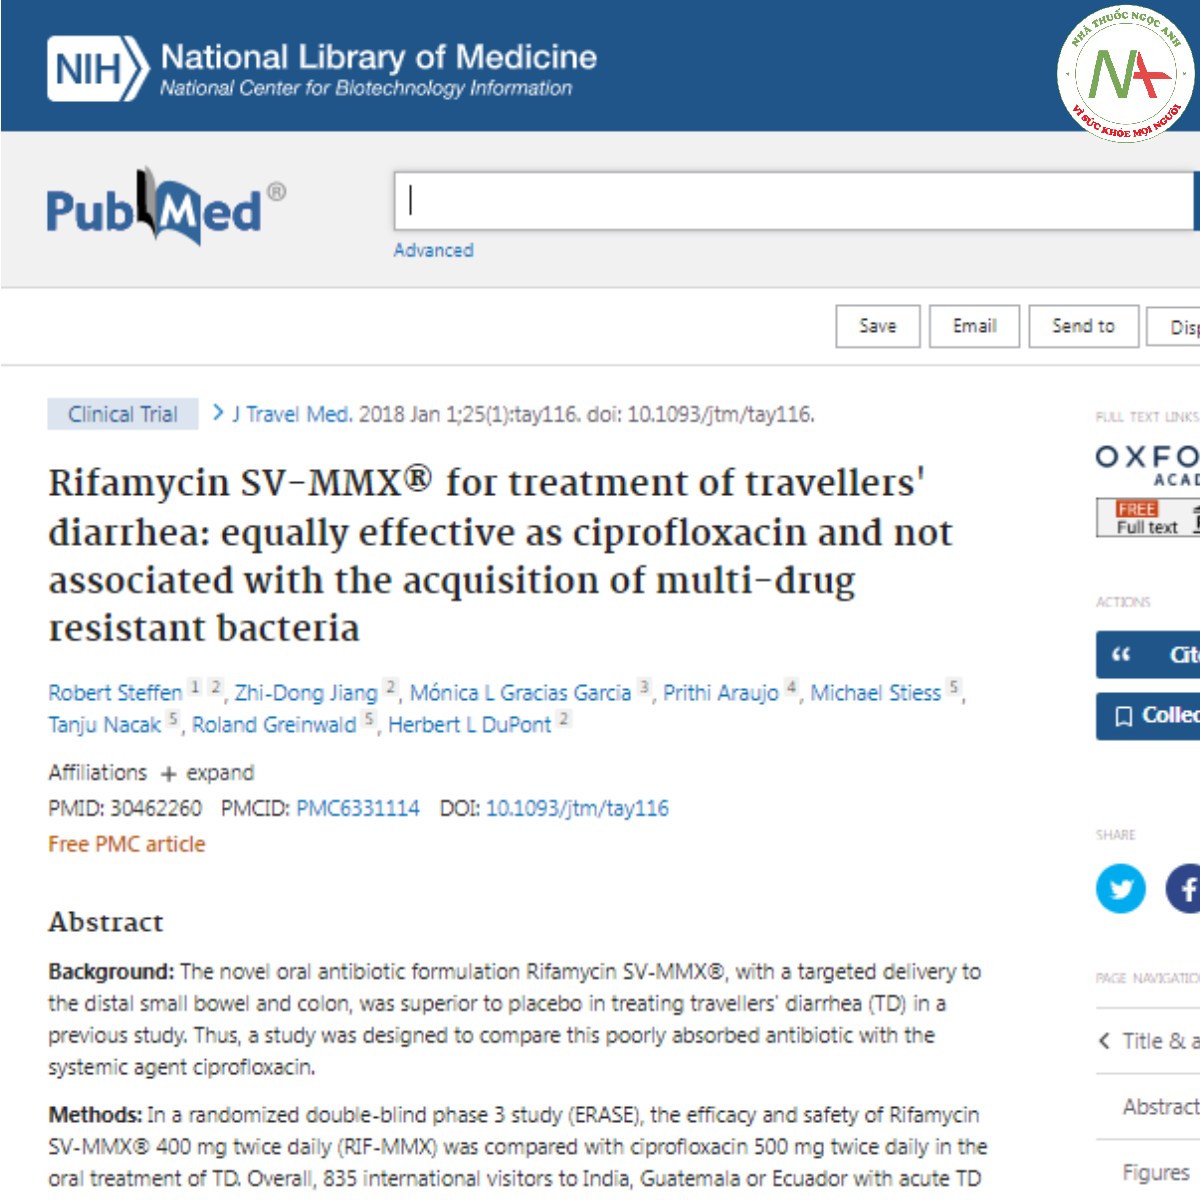 Rifamycin SV-MMX® for treatment of travellers' diarrhea_ equally effective as ciprofloxacin and not associated with the acquisition of multi-drug resistant bacteria